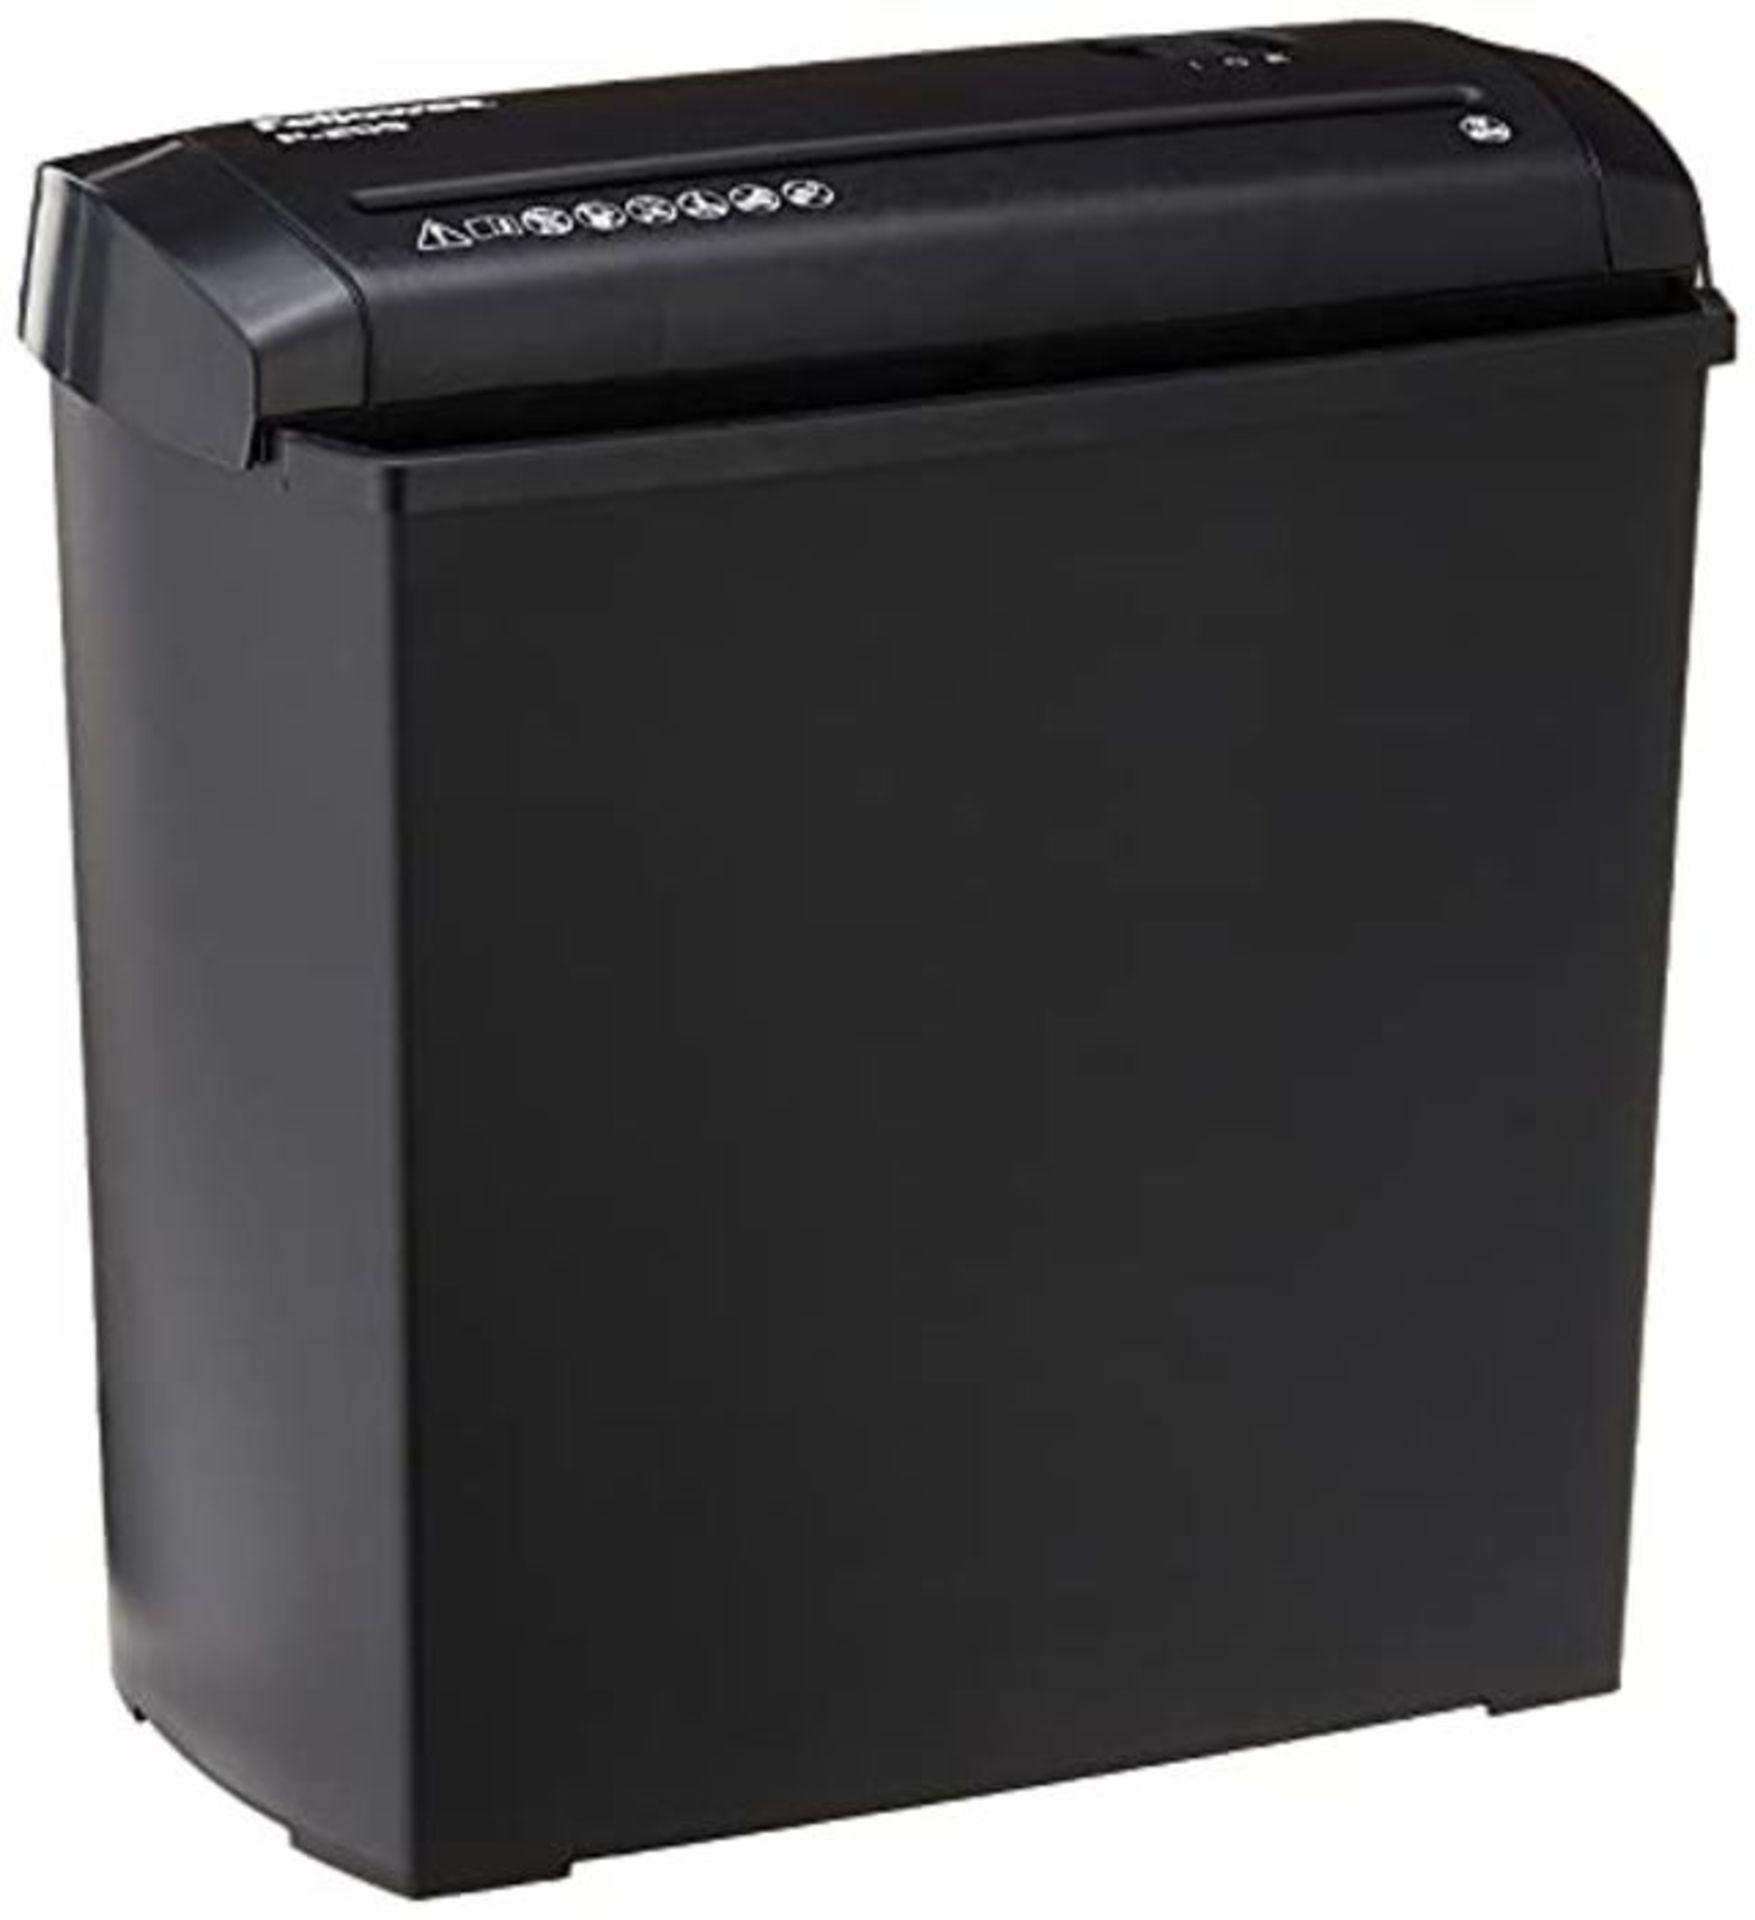 Fellowes P-25S Basic Security Strip Cut Personal Shredder, Shreds 5 A4 Sheets into an